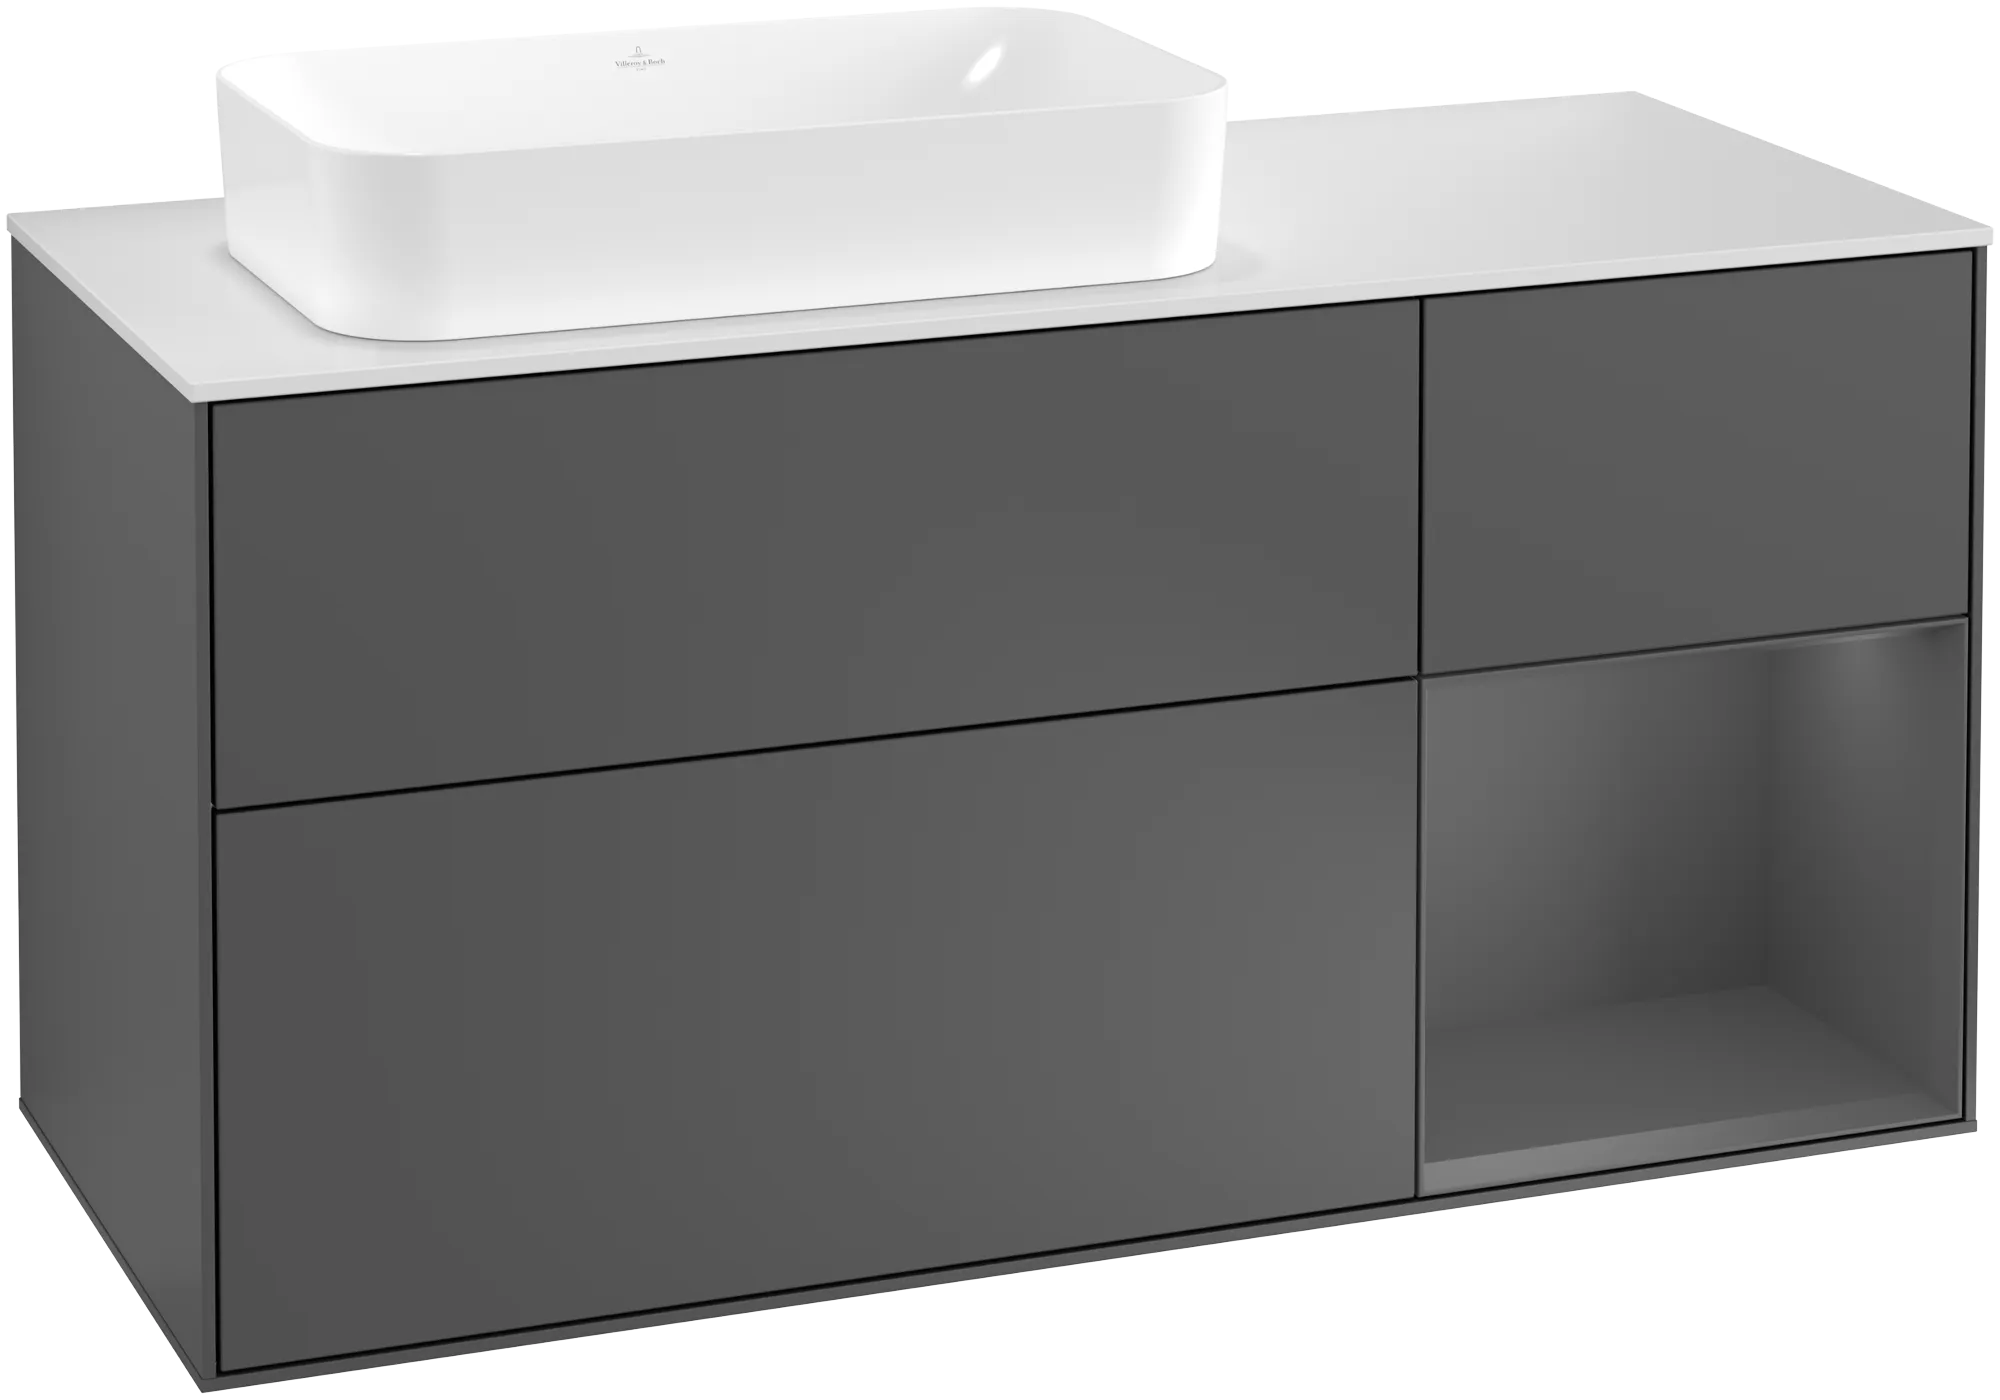 Picture of VILLEROY BOCH Finion Vanity unit, with lighting, 3 pull-out compartments, 1200 x 603 x 501 mm, Anthracite Matt Lacquer / Anthracite Matt Lacquer / Glass White Matt #G281GKGK